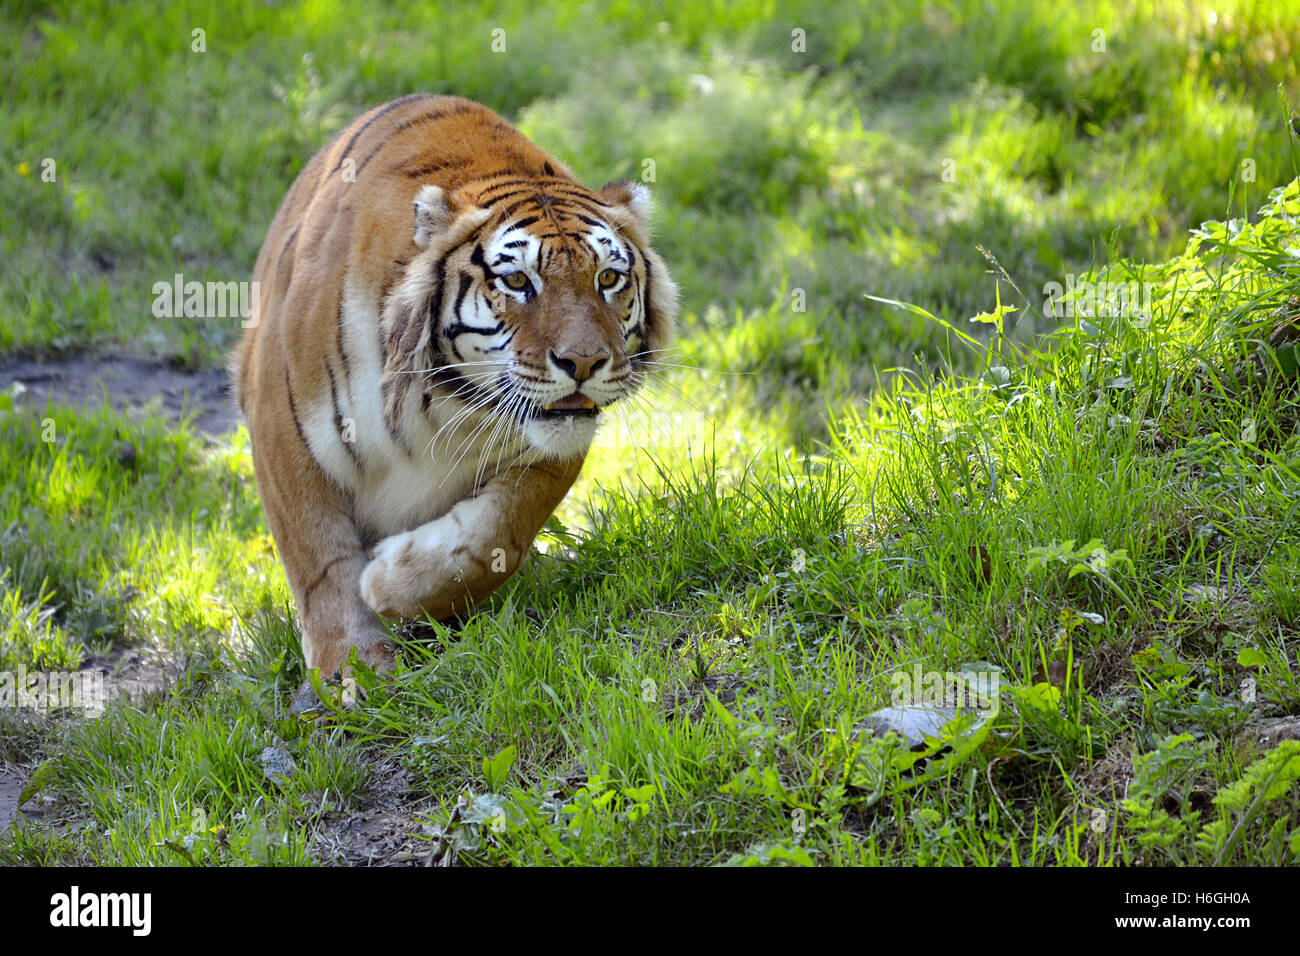 Tiger (Panthera tigris) on grass seen from front in attack position Stock Photo